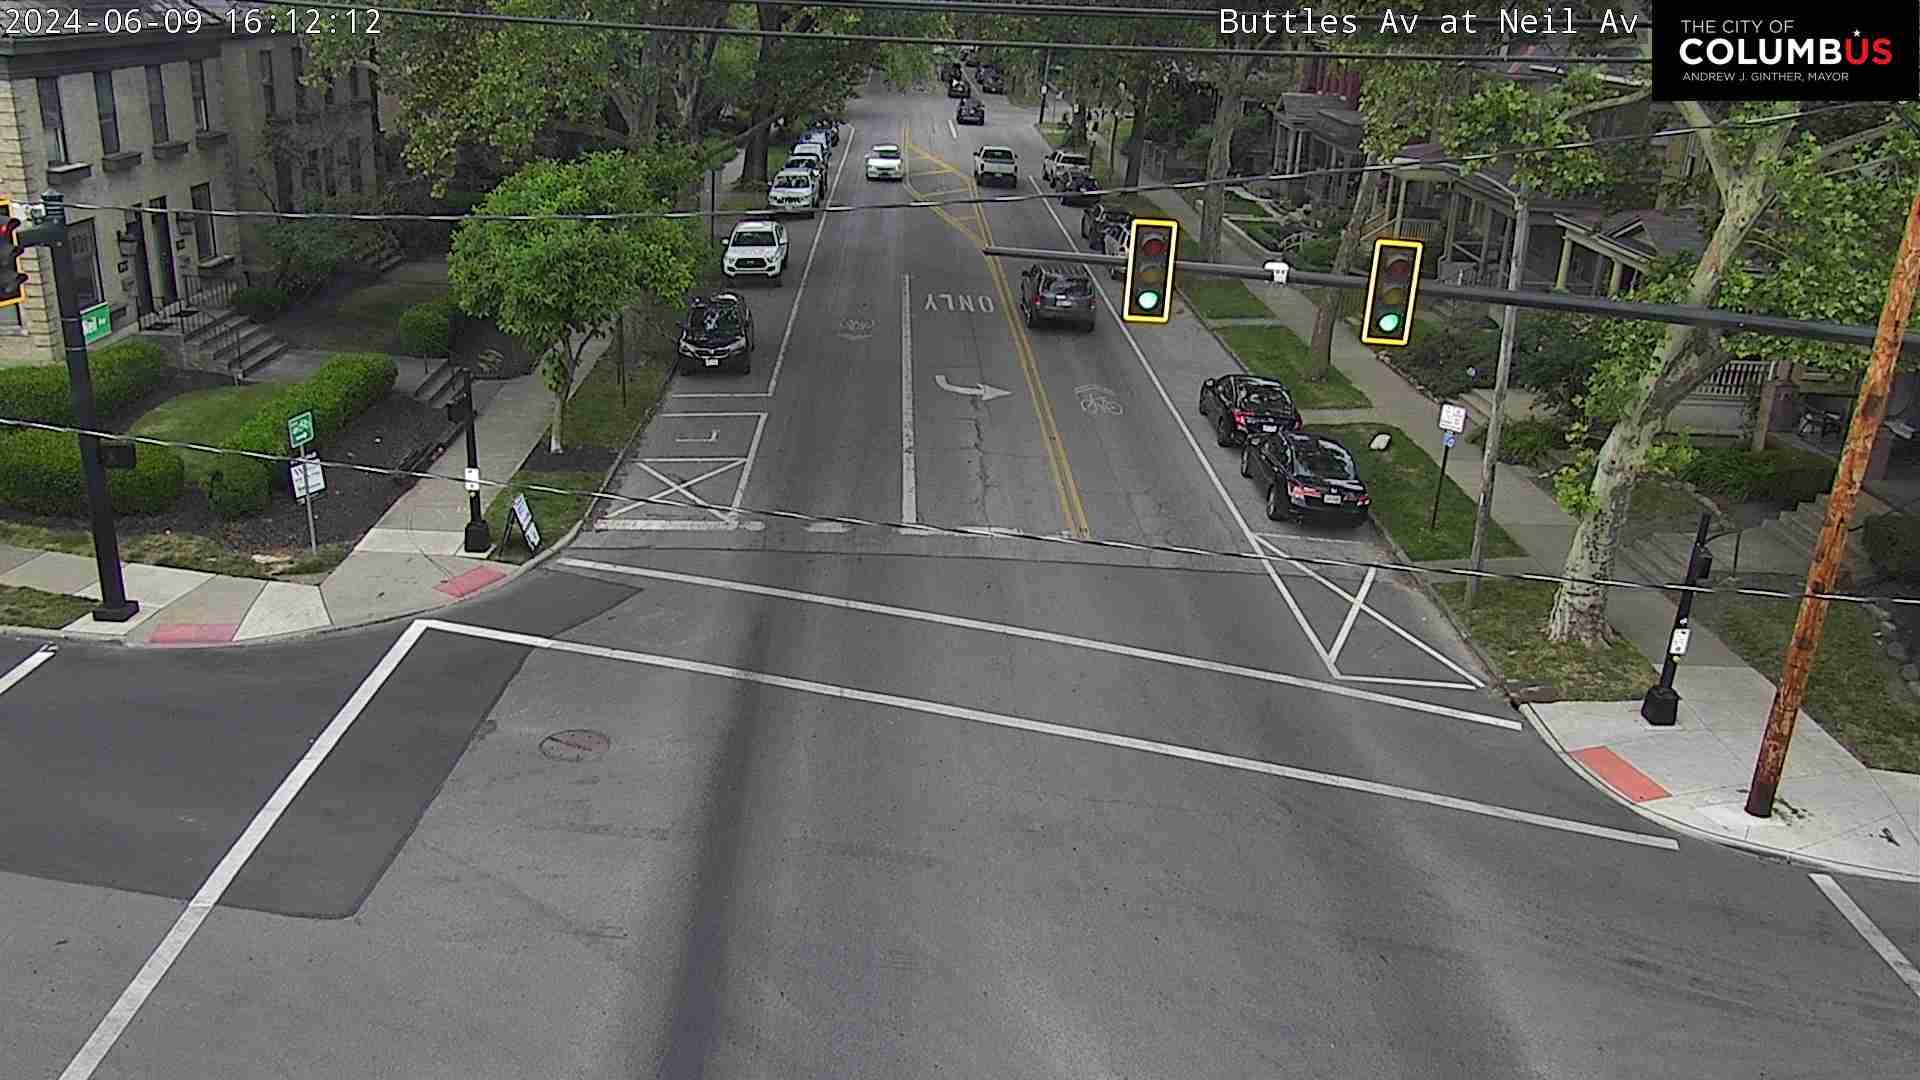 Traffic Cam Harrison West: City of Columbus) Neil Ave at Buttles Ave